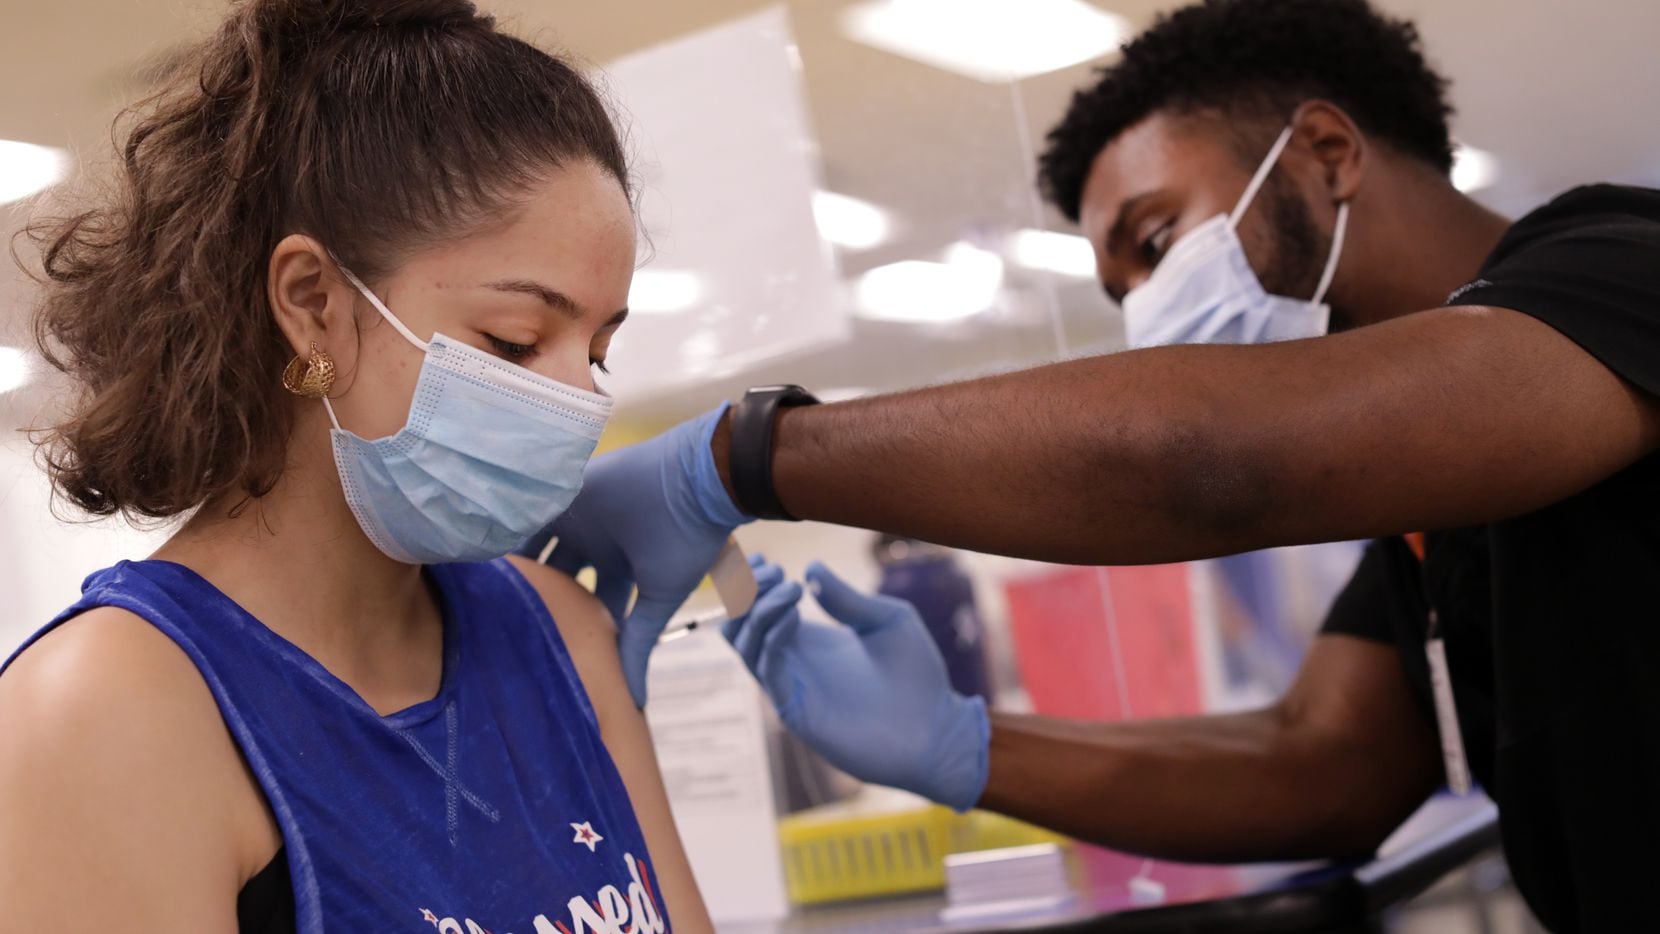 16-year-old Emilia Carreno, left, receives the COVID-19 vaccine from Kendall Payne during a DISD and Parkland Hospital vaccination pop-up clinic at Samuell High School in Dallas, TX, on Jun. 28, 2021.